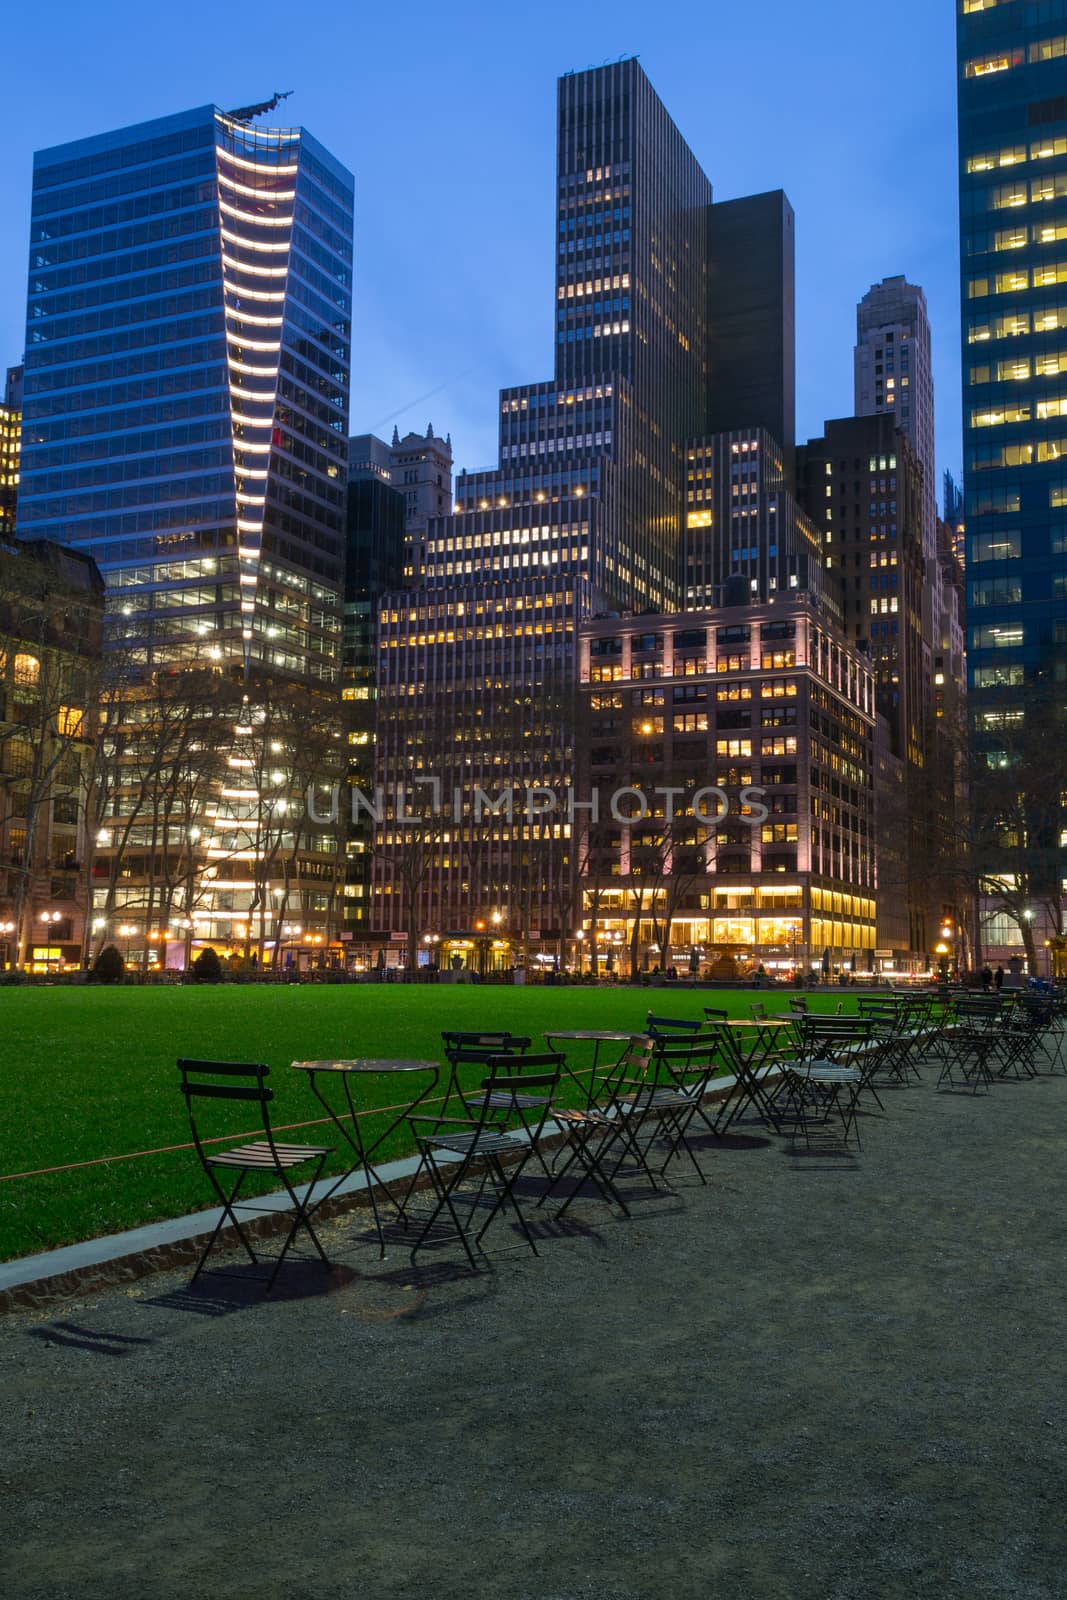 Lights by Bryant park by rmbarricarte